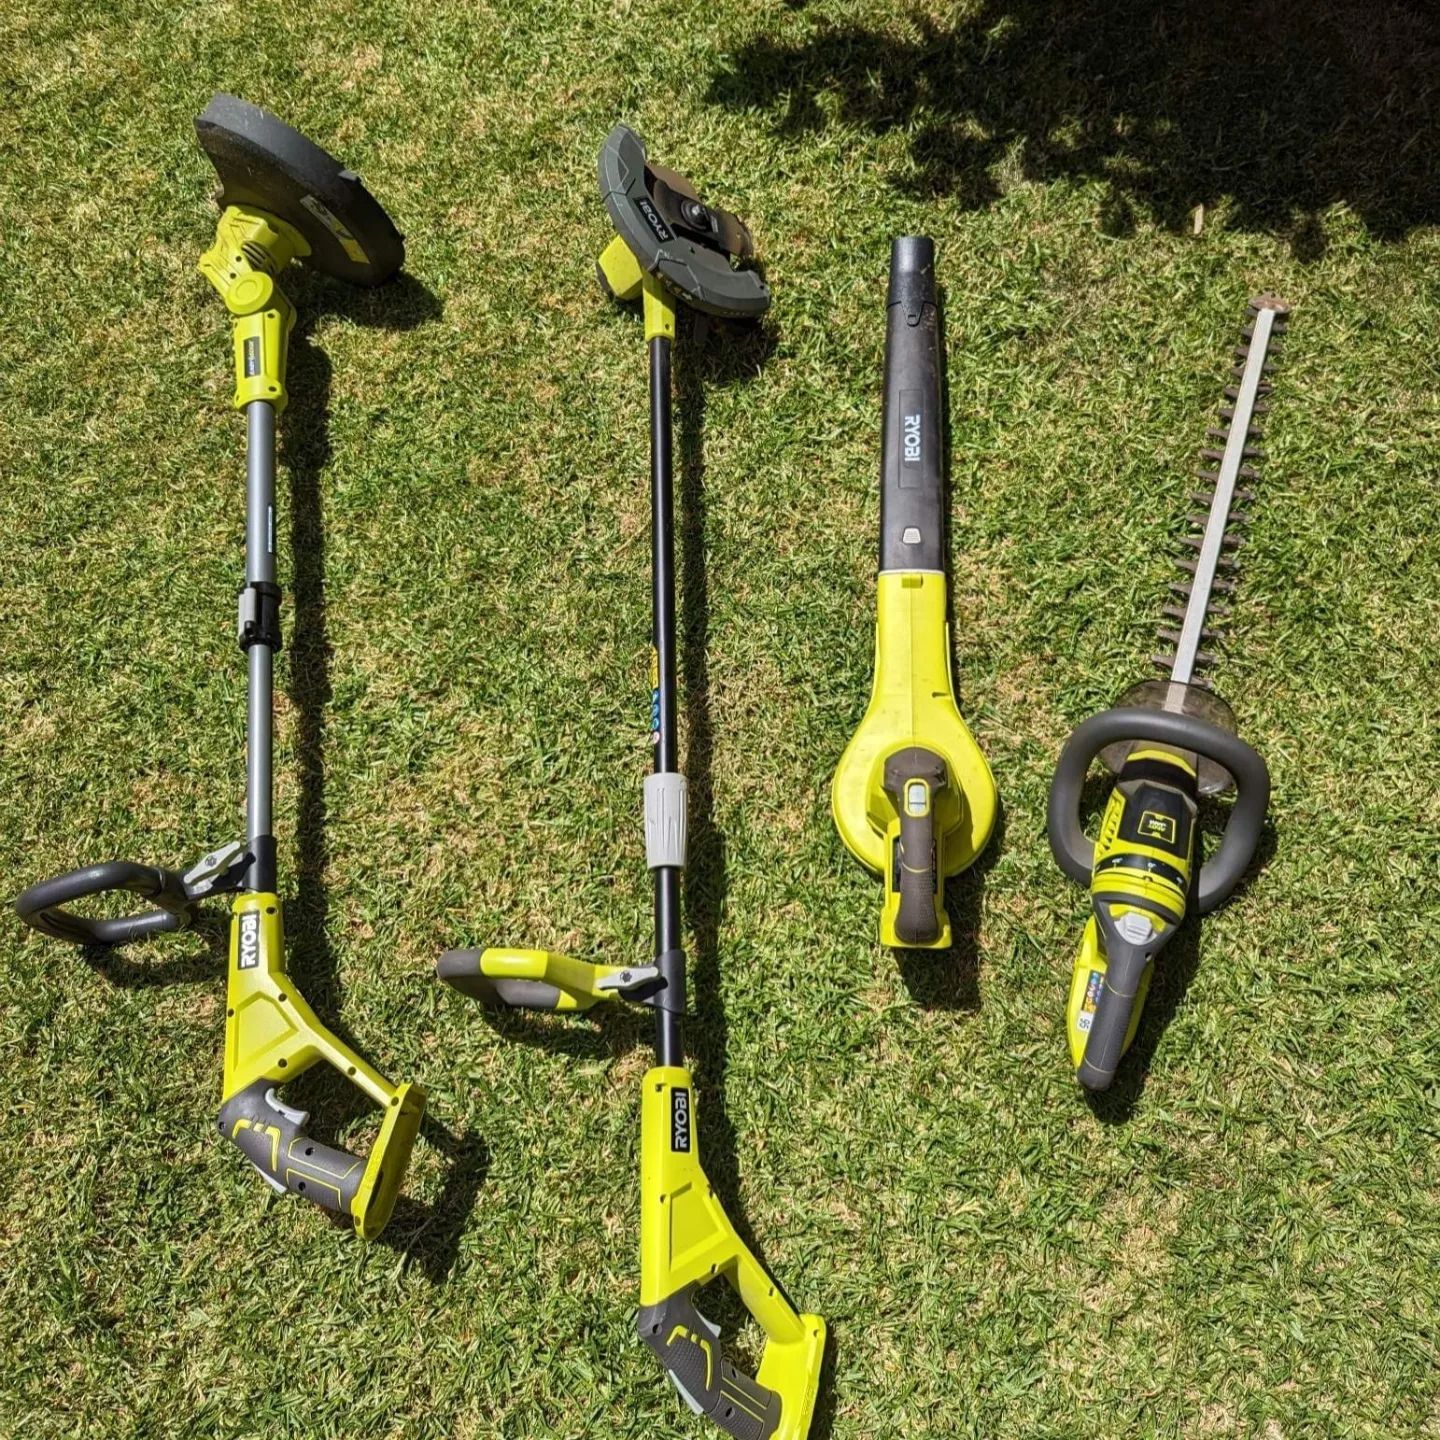 @Backyardworkshop is ready to tackle some backyard work with this RYOBI line up! 😎
Are you working with RYOBI this weekend?
Don't forget to tag @ryobiau in your posts & story's for a chance to be featured.

#RYOBIau #batterypowered #RYOBIpowertools #RYOBImade #lawns #grass #hedges